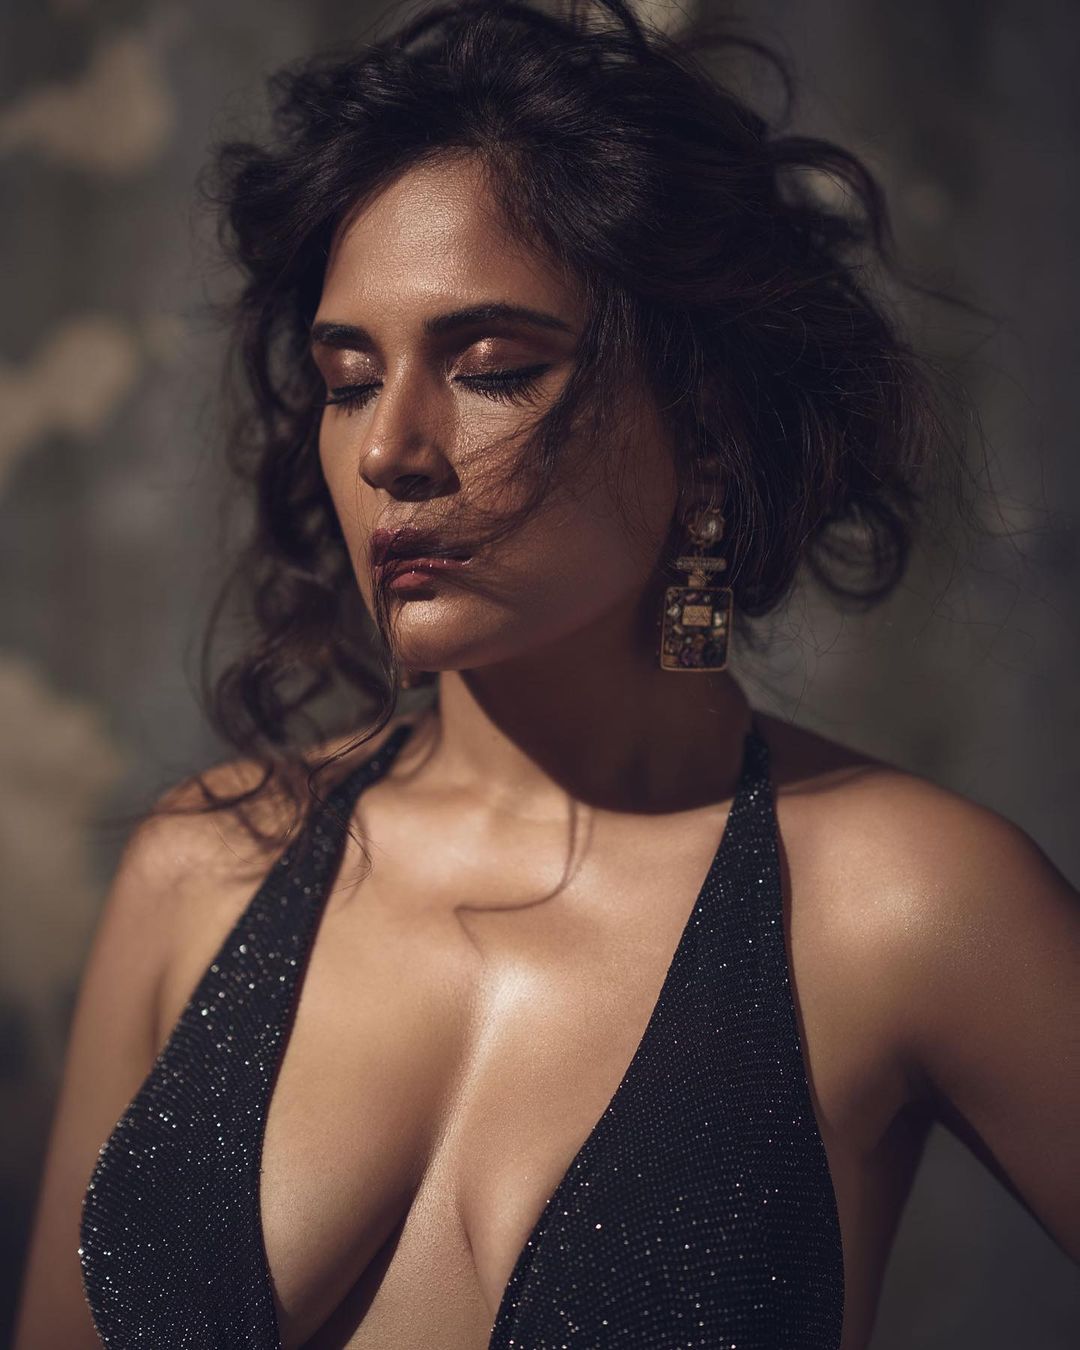 Richa Chadha looks stunning in the black outfit